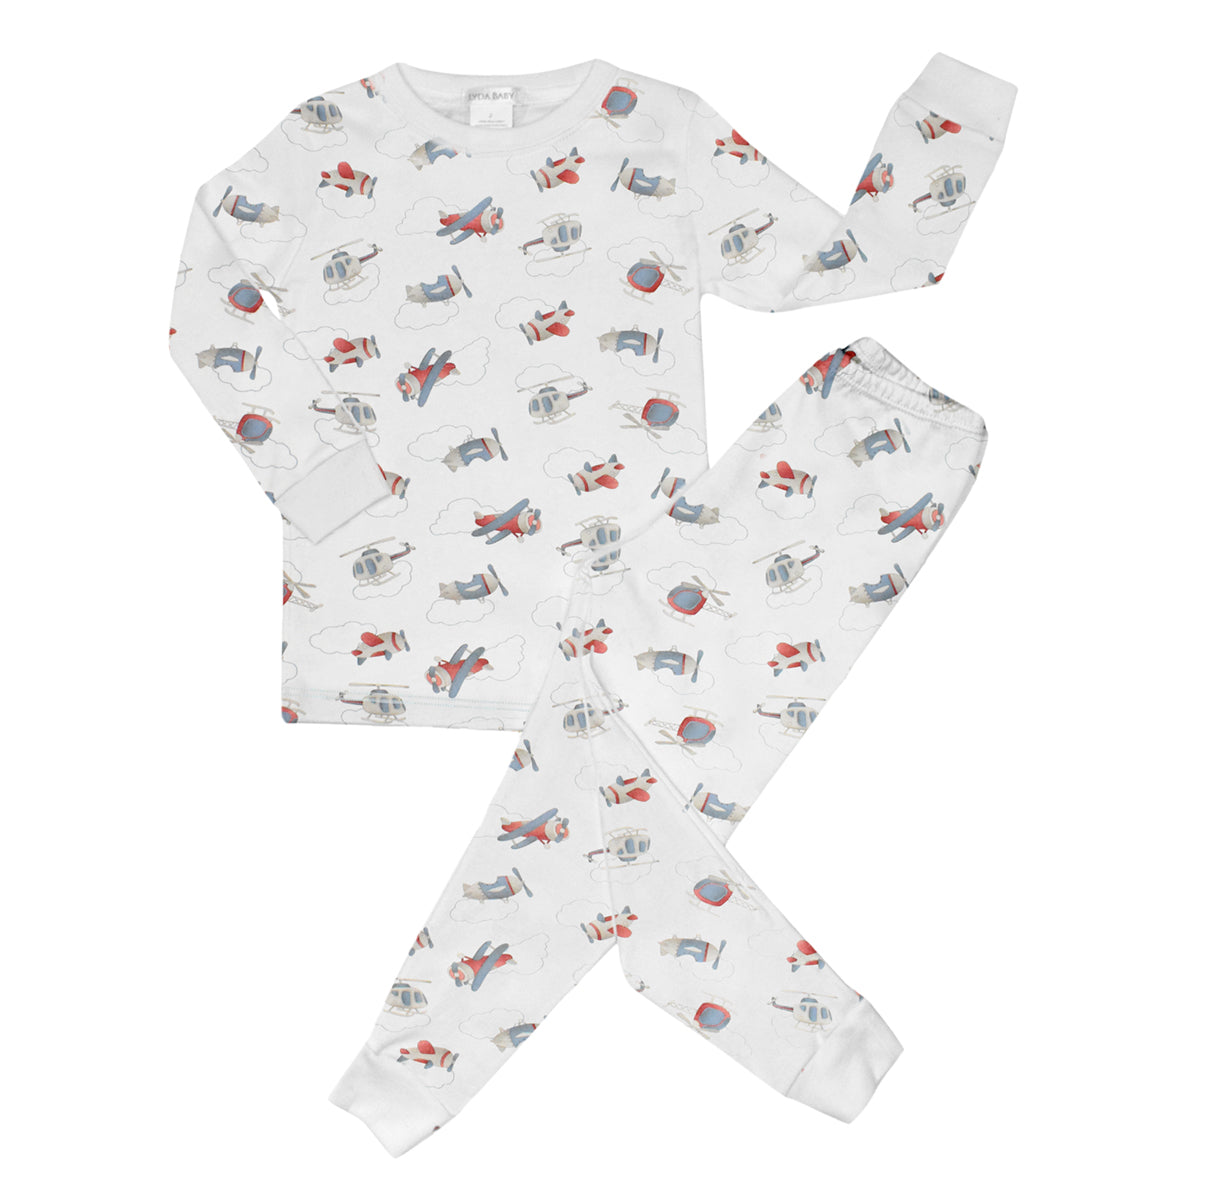 Planes and Helicopters Printed Pajama | Boy